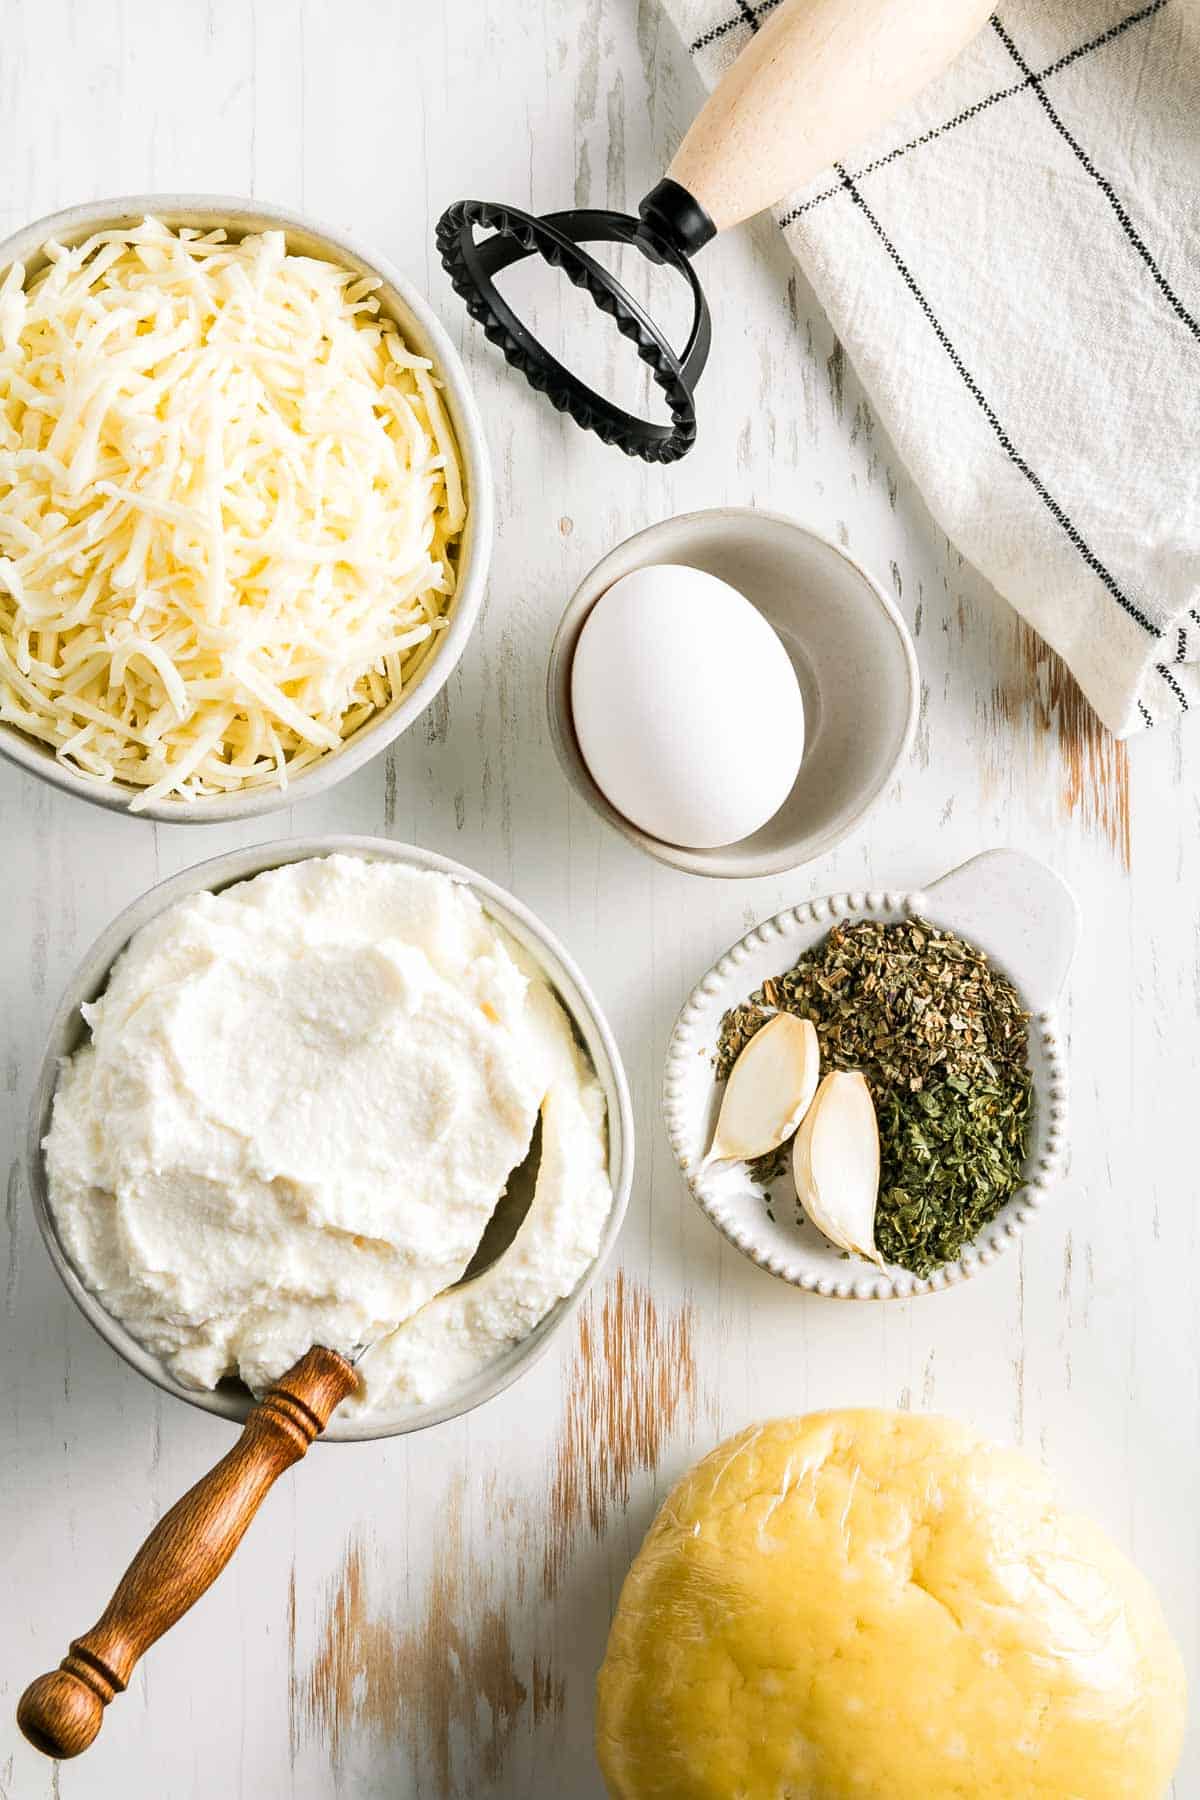 Pasta dough wrapped in plastic next to a bowl of ricotta cheese and shredded Italian blend cheese along with an egg, spices and a ravioli stamp.